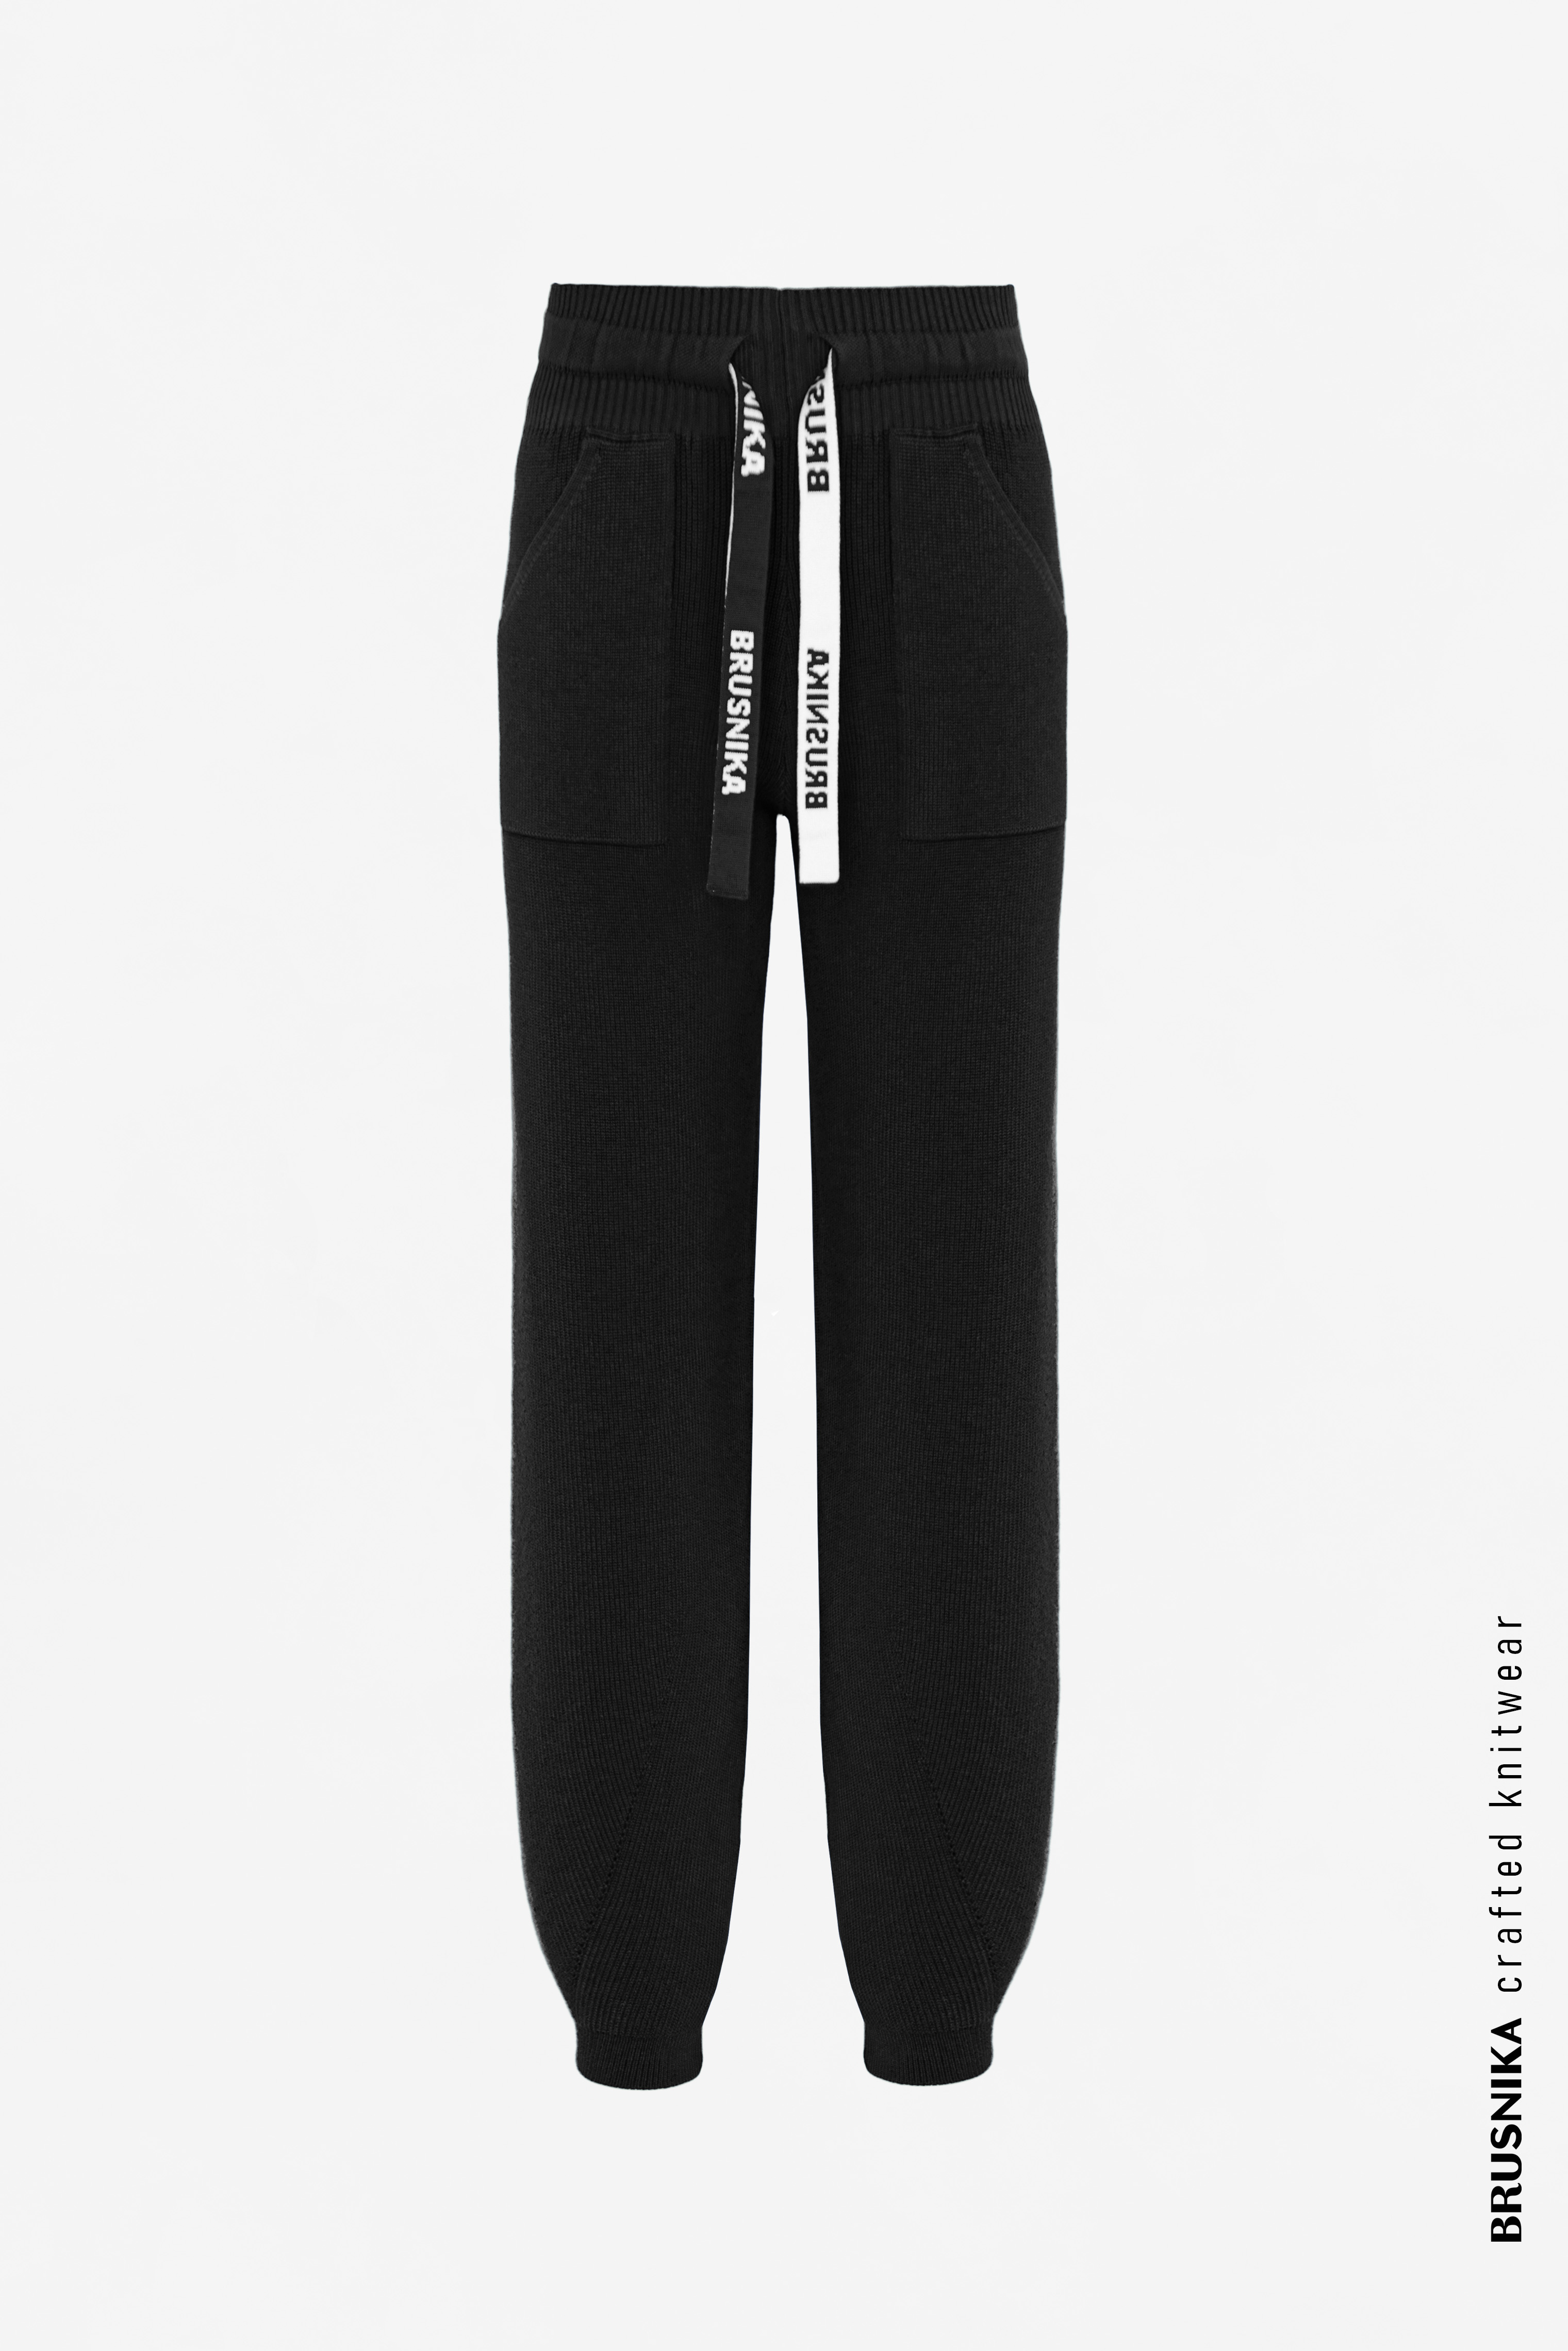 Trousers 3299-01 Black from BRUSNiKA